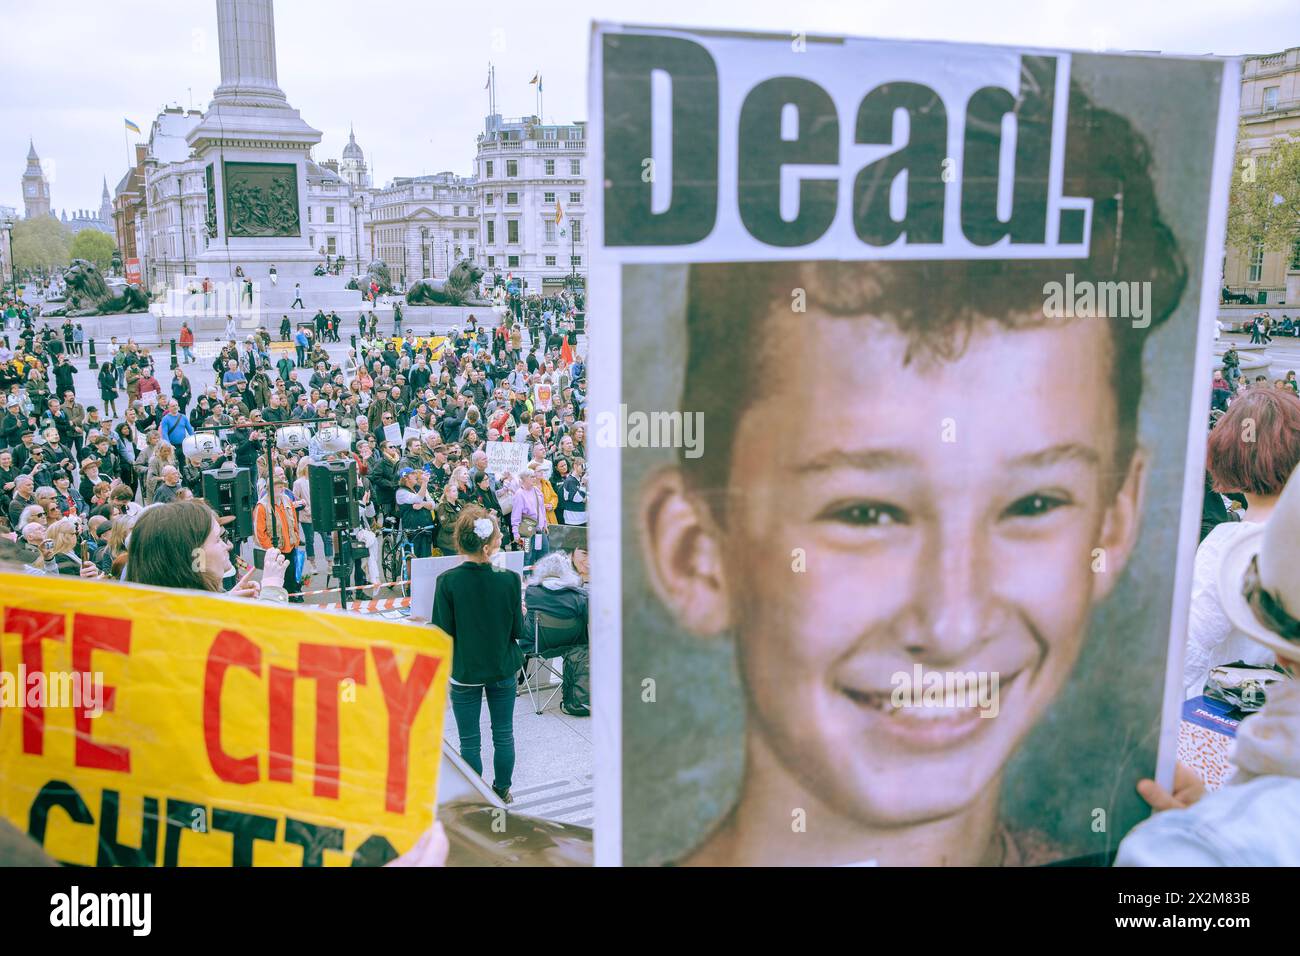 Anti-vaccine protesters gather for their TRUTH BE TOLD demonstration in Trafalgar Square, London. Stock Photo